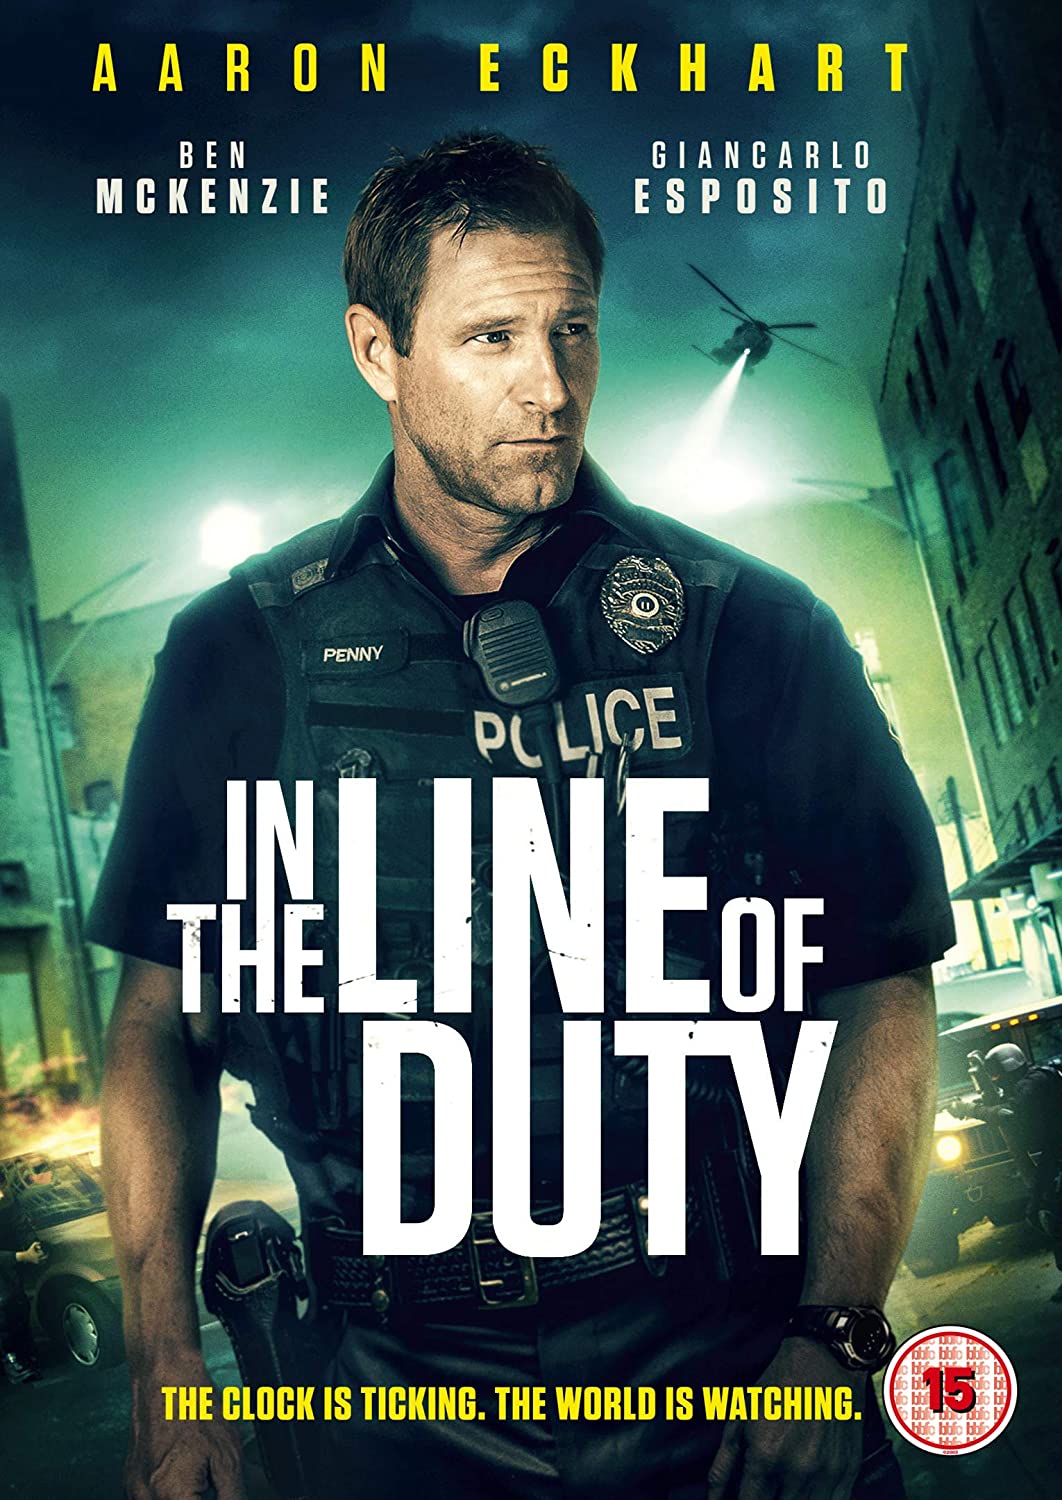 In the Line of Duty – Action [DVD]